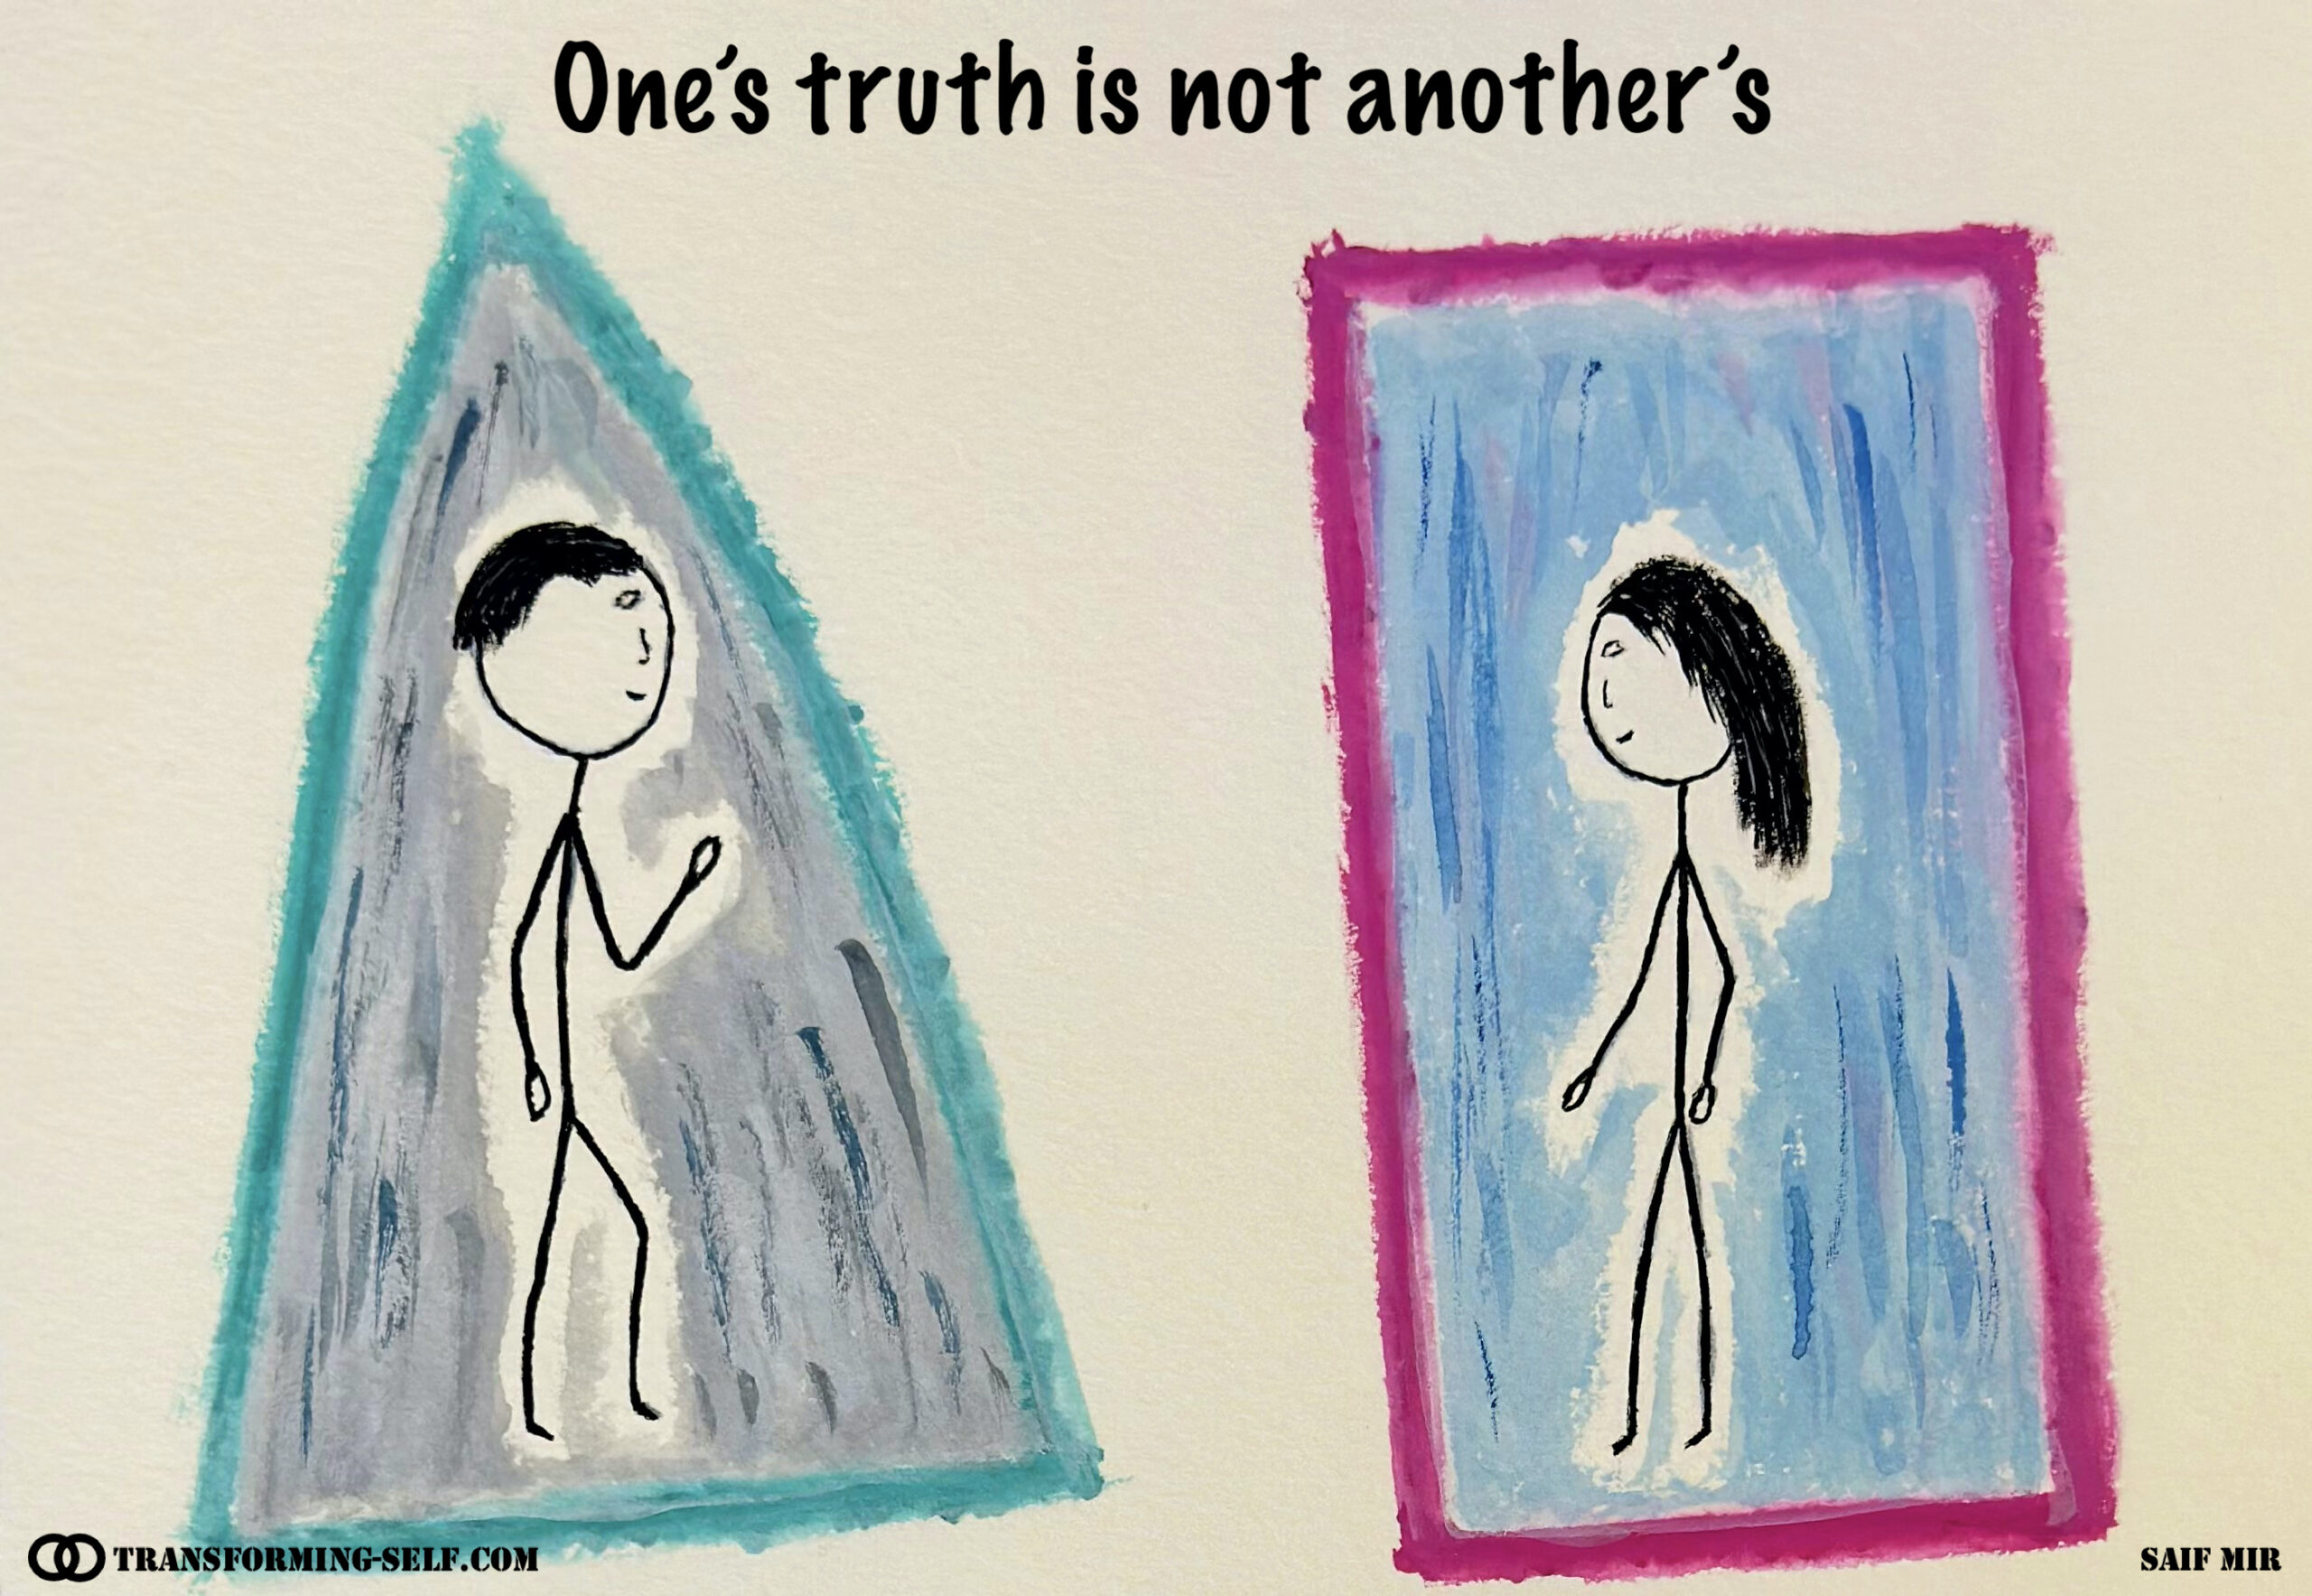 One's truth is not another's